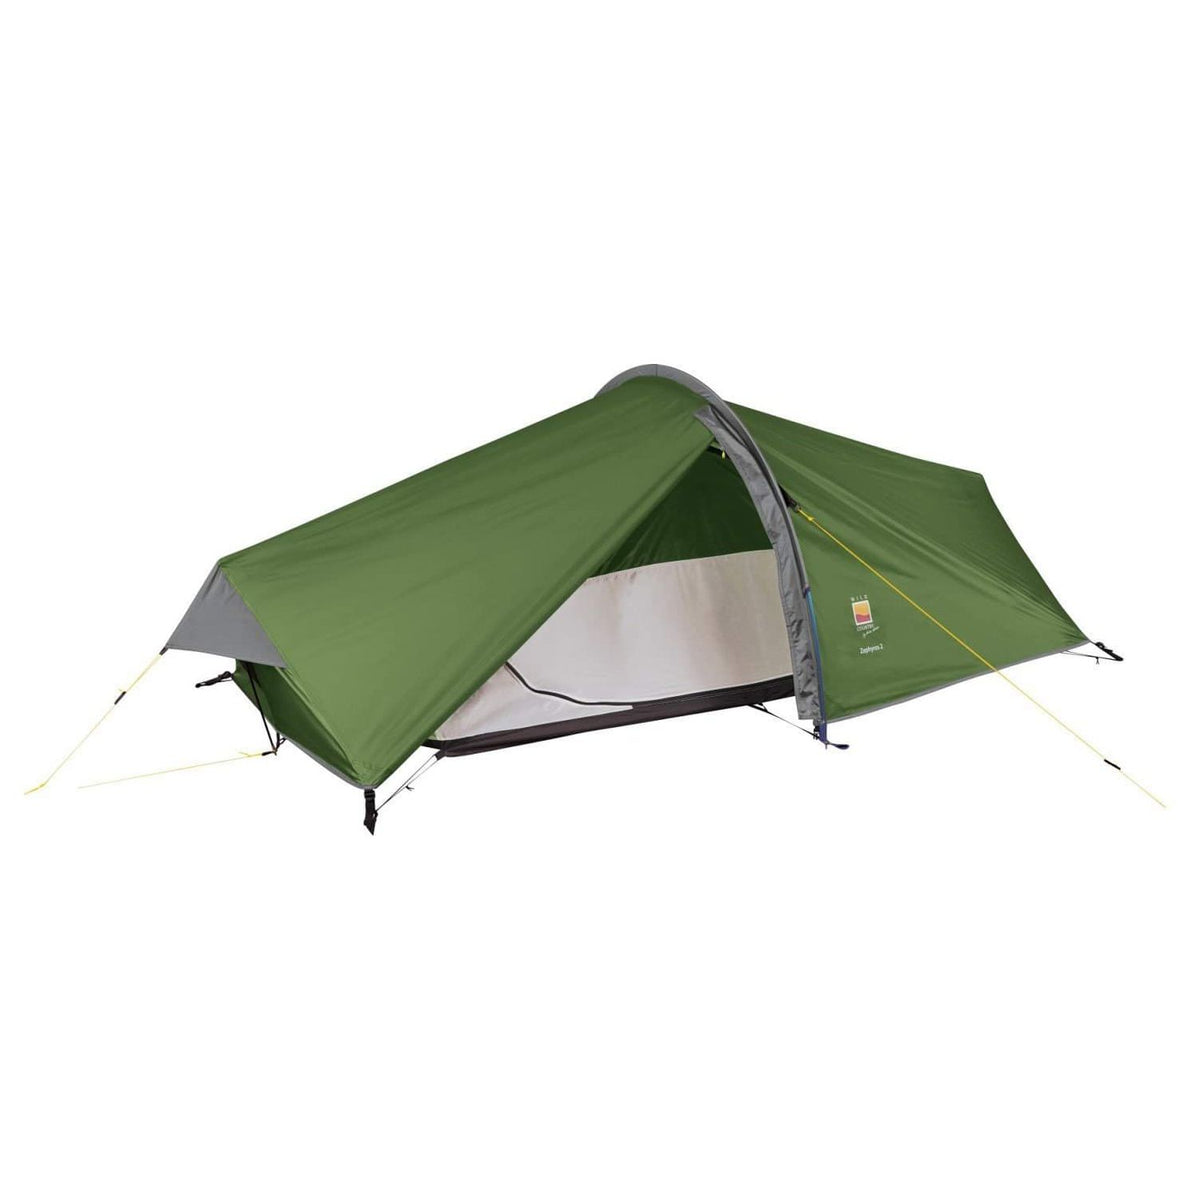 Wild Country Zephyros Compact 2 Two-Person Tent - Green